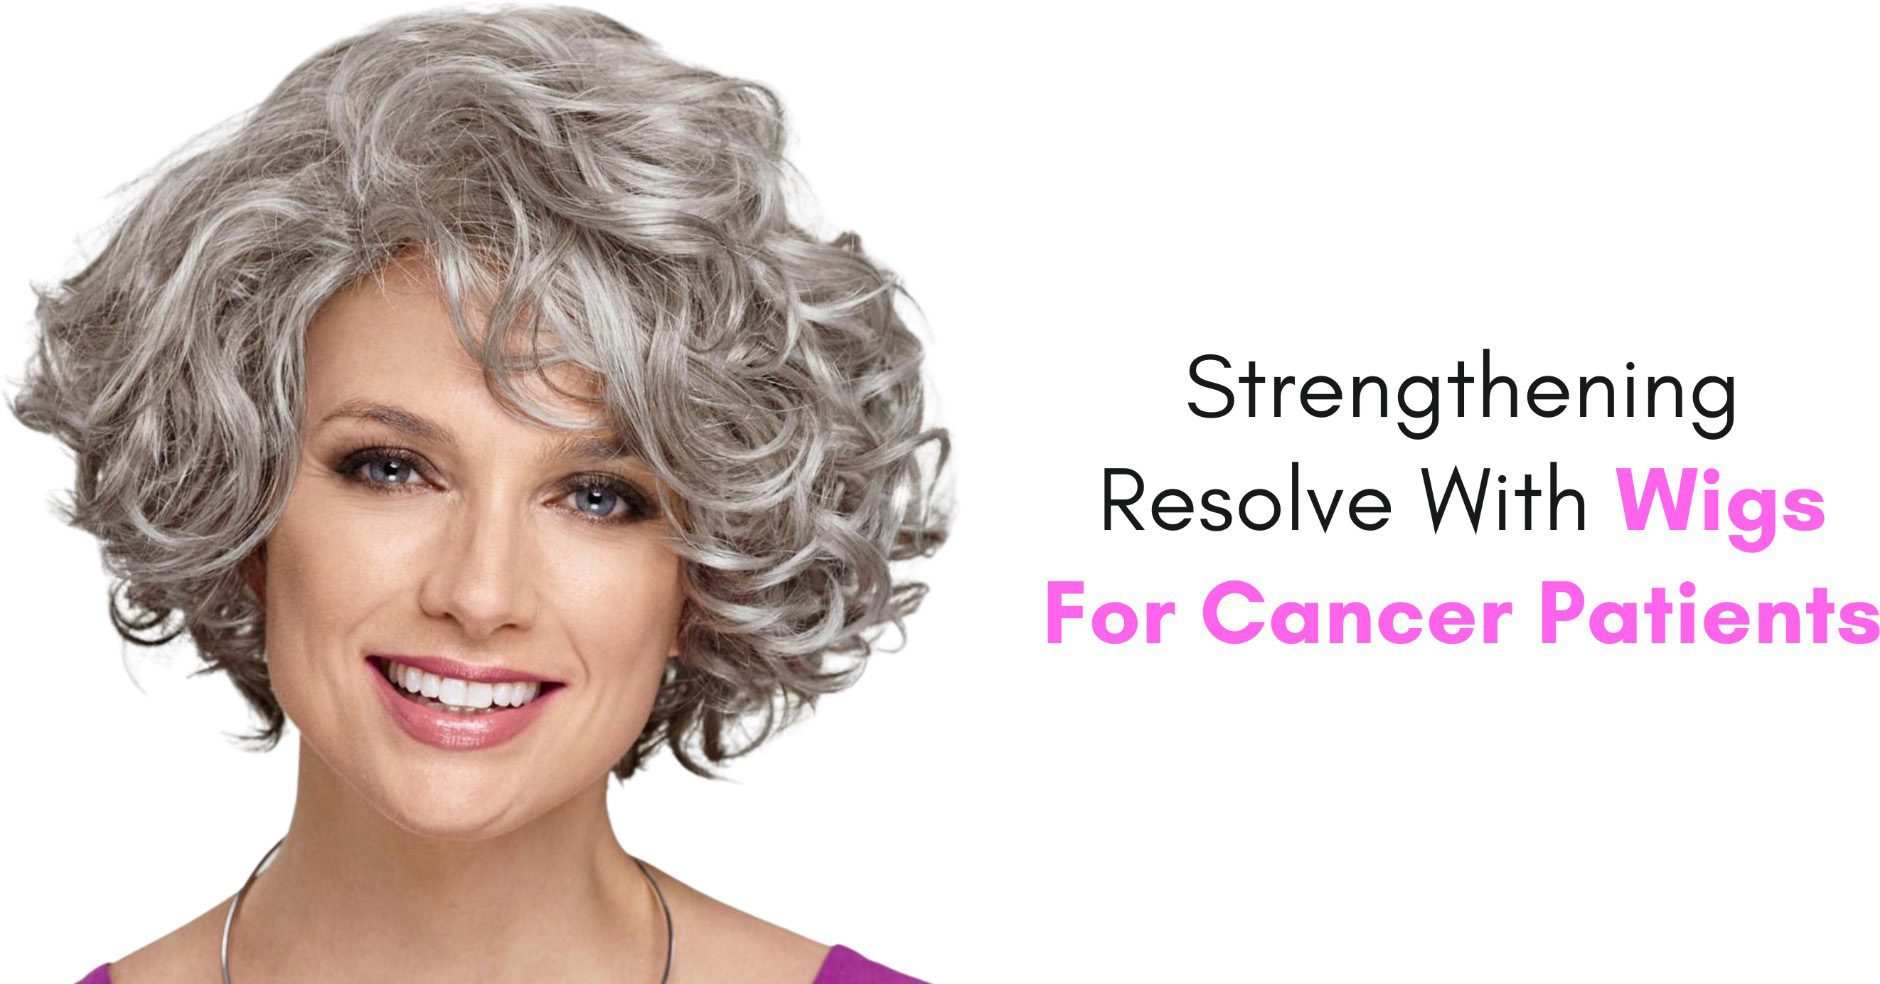 Strengthening Resolve With Wigs For Cancer Patients